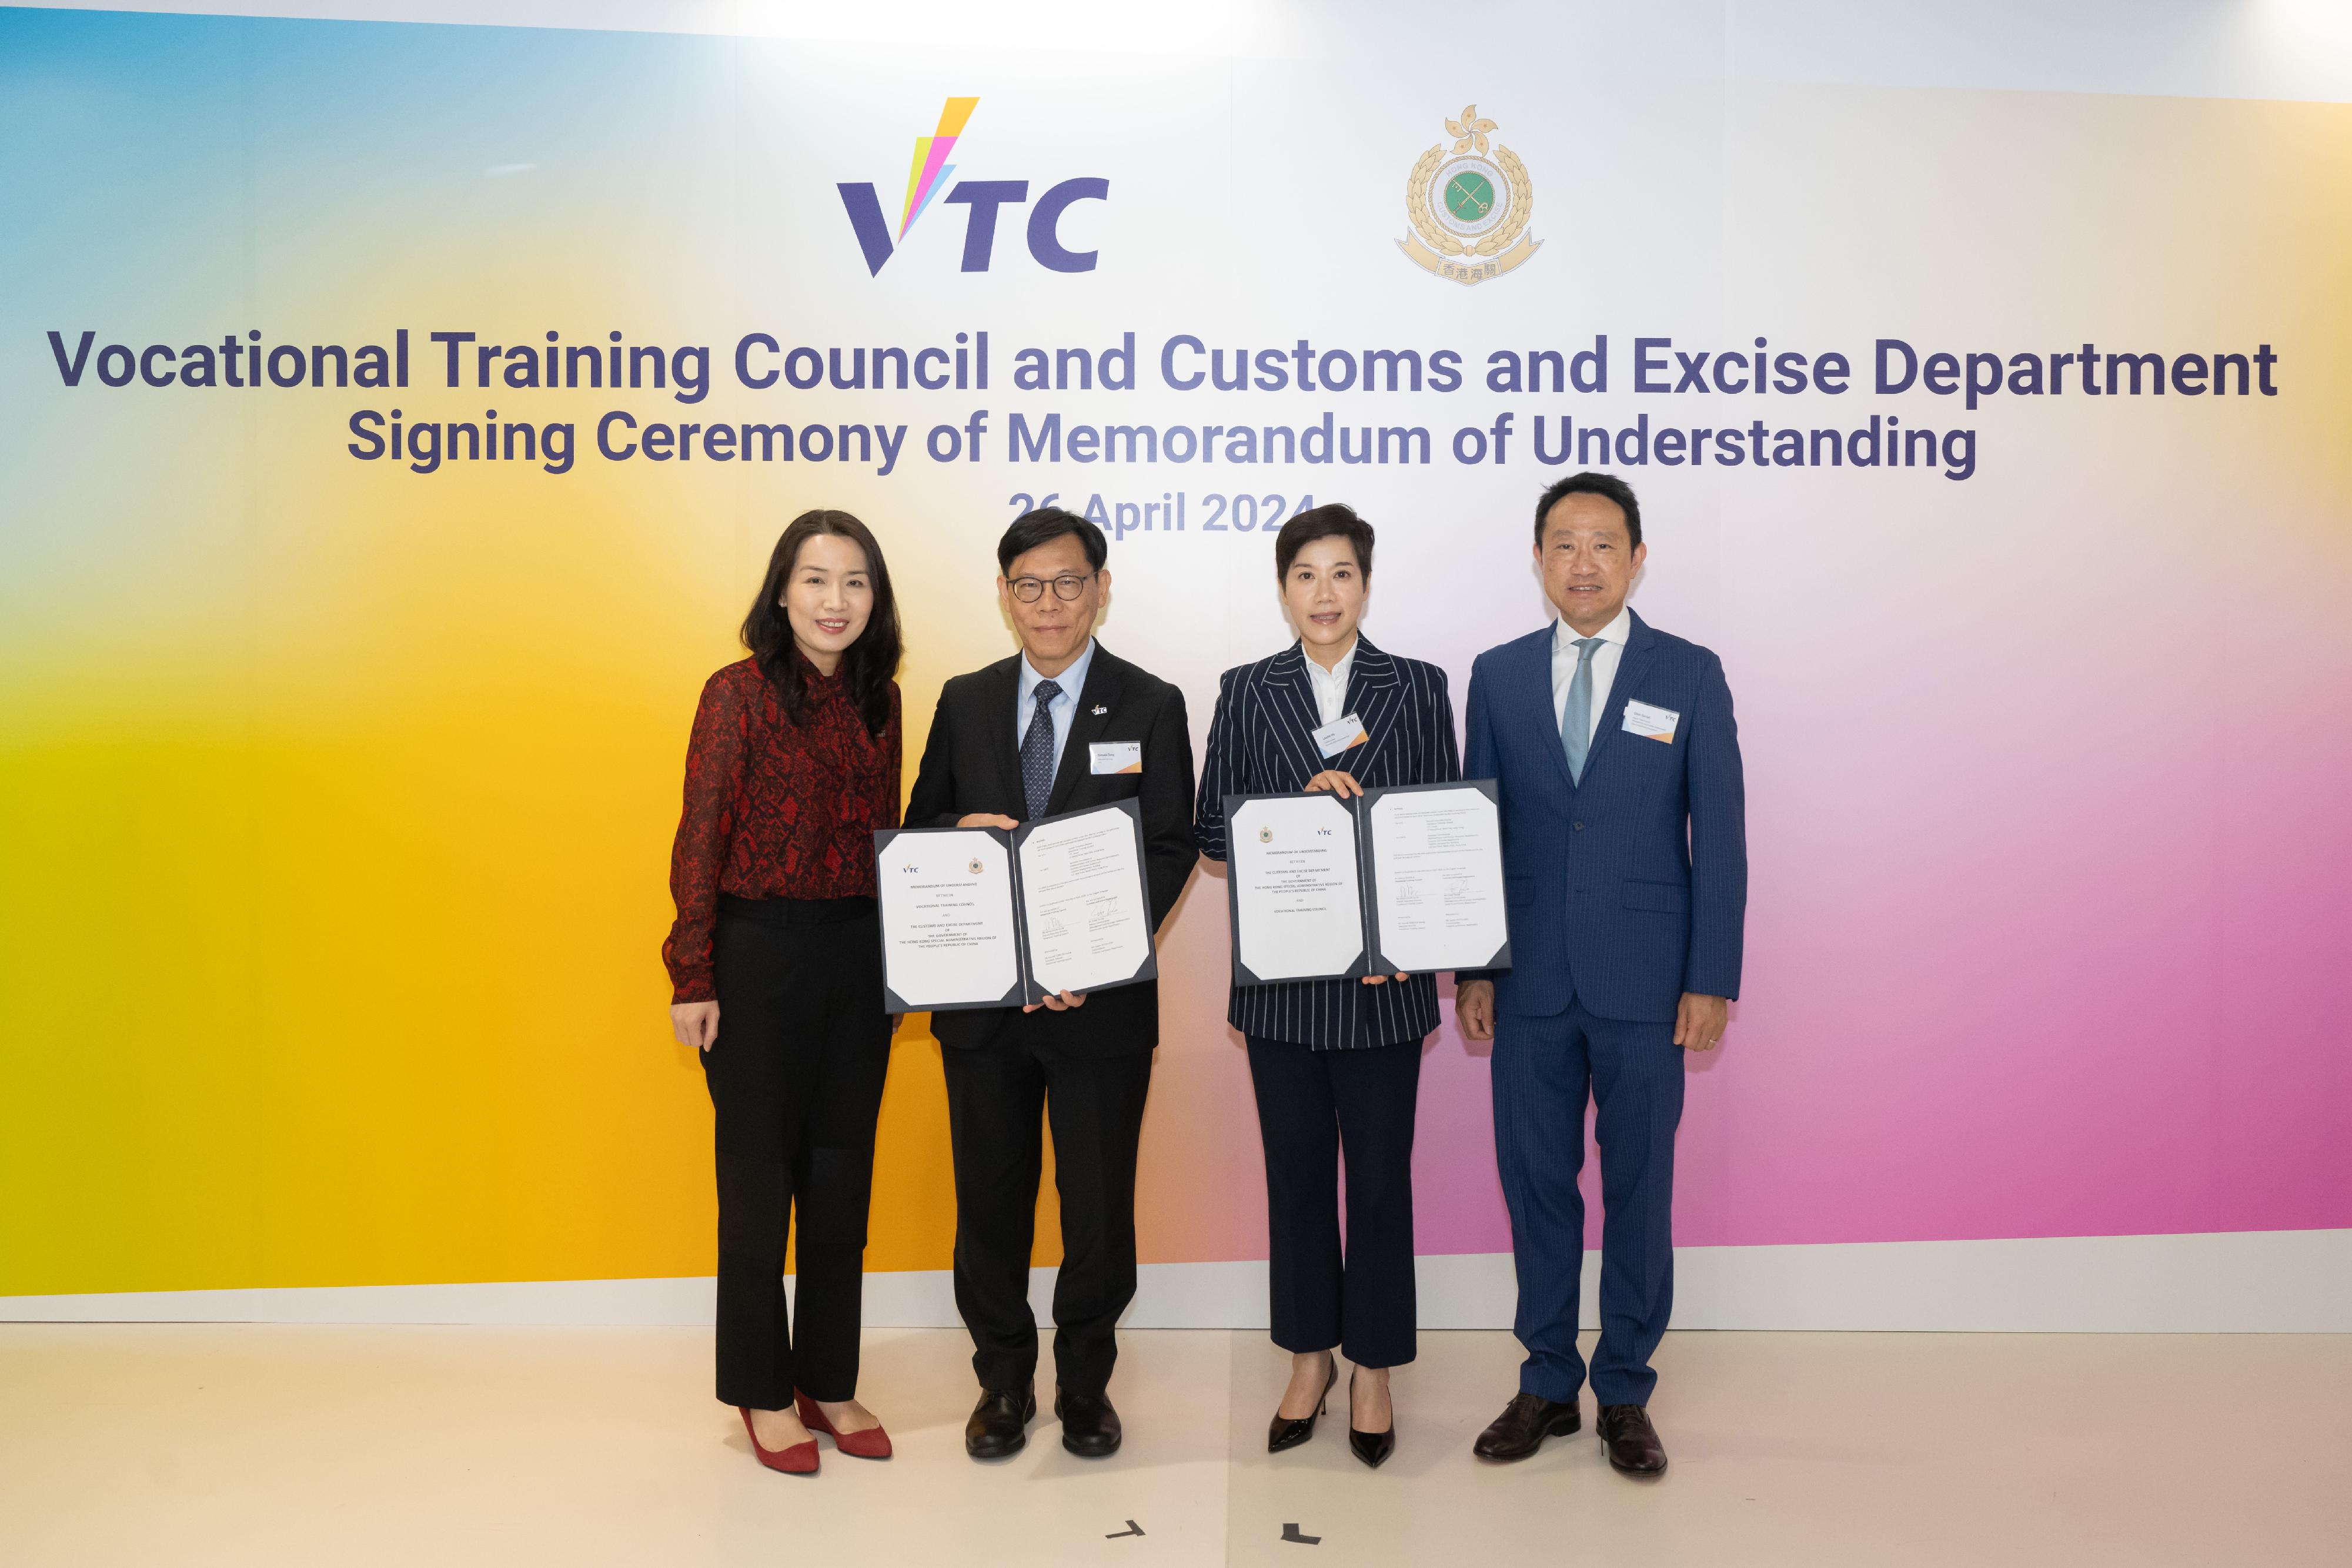 The Customs and Excise Department signed a Memorandum of Understanding with the Vocational Training Council (VTC) on April 26 for enhancing Customs officers' training in professional areas and promoting Customs work and "Customs YES" to VTC students. Photo shows (from left) Deputy Executive Director of the VTC Ms Alaina Shum; the Executive Director of the VTC, Mr Donald Tong; the Commissioner of Customs and Excise, Ms Louise Ho; and  the Deputy Commissioner (Management and Strategic Development) of Customs, Mr Chan Tsz-tat, at the signing ceremony.